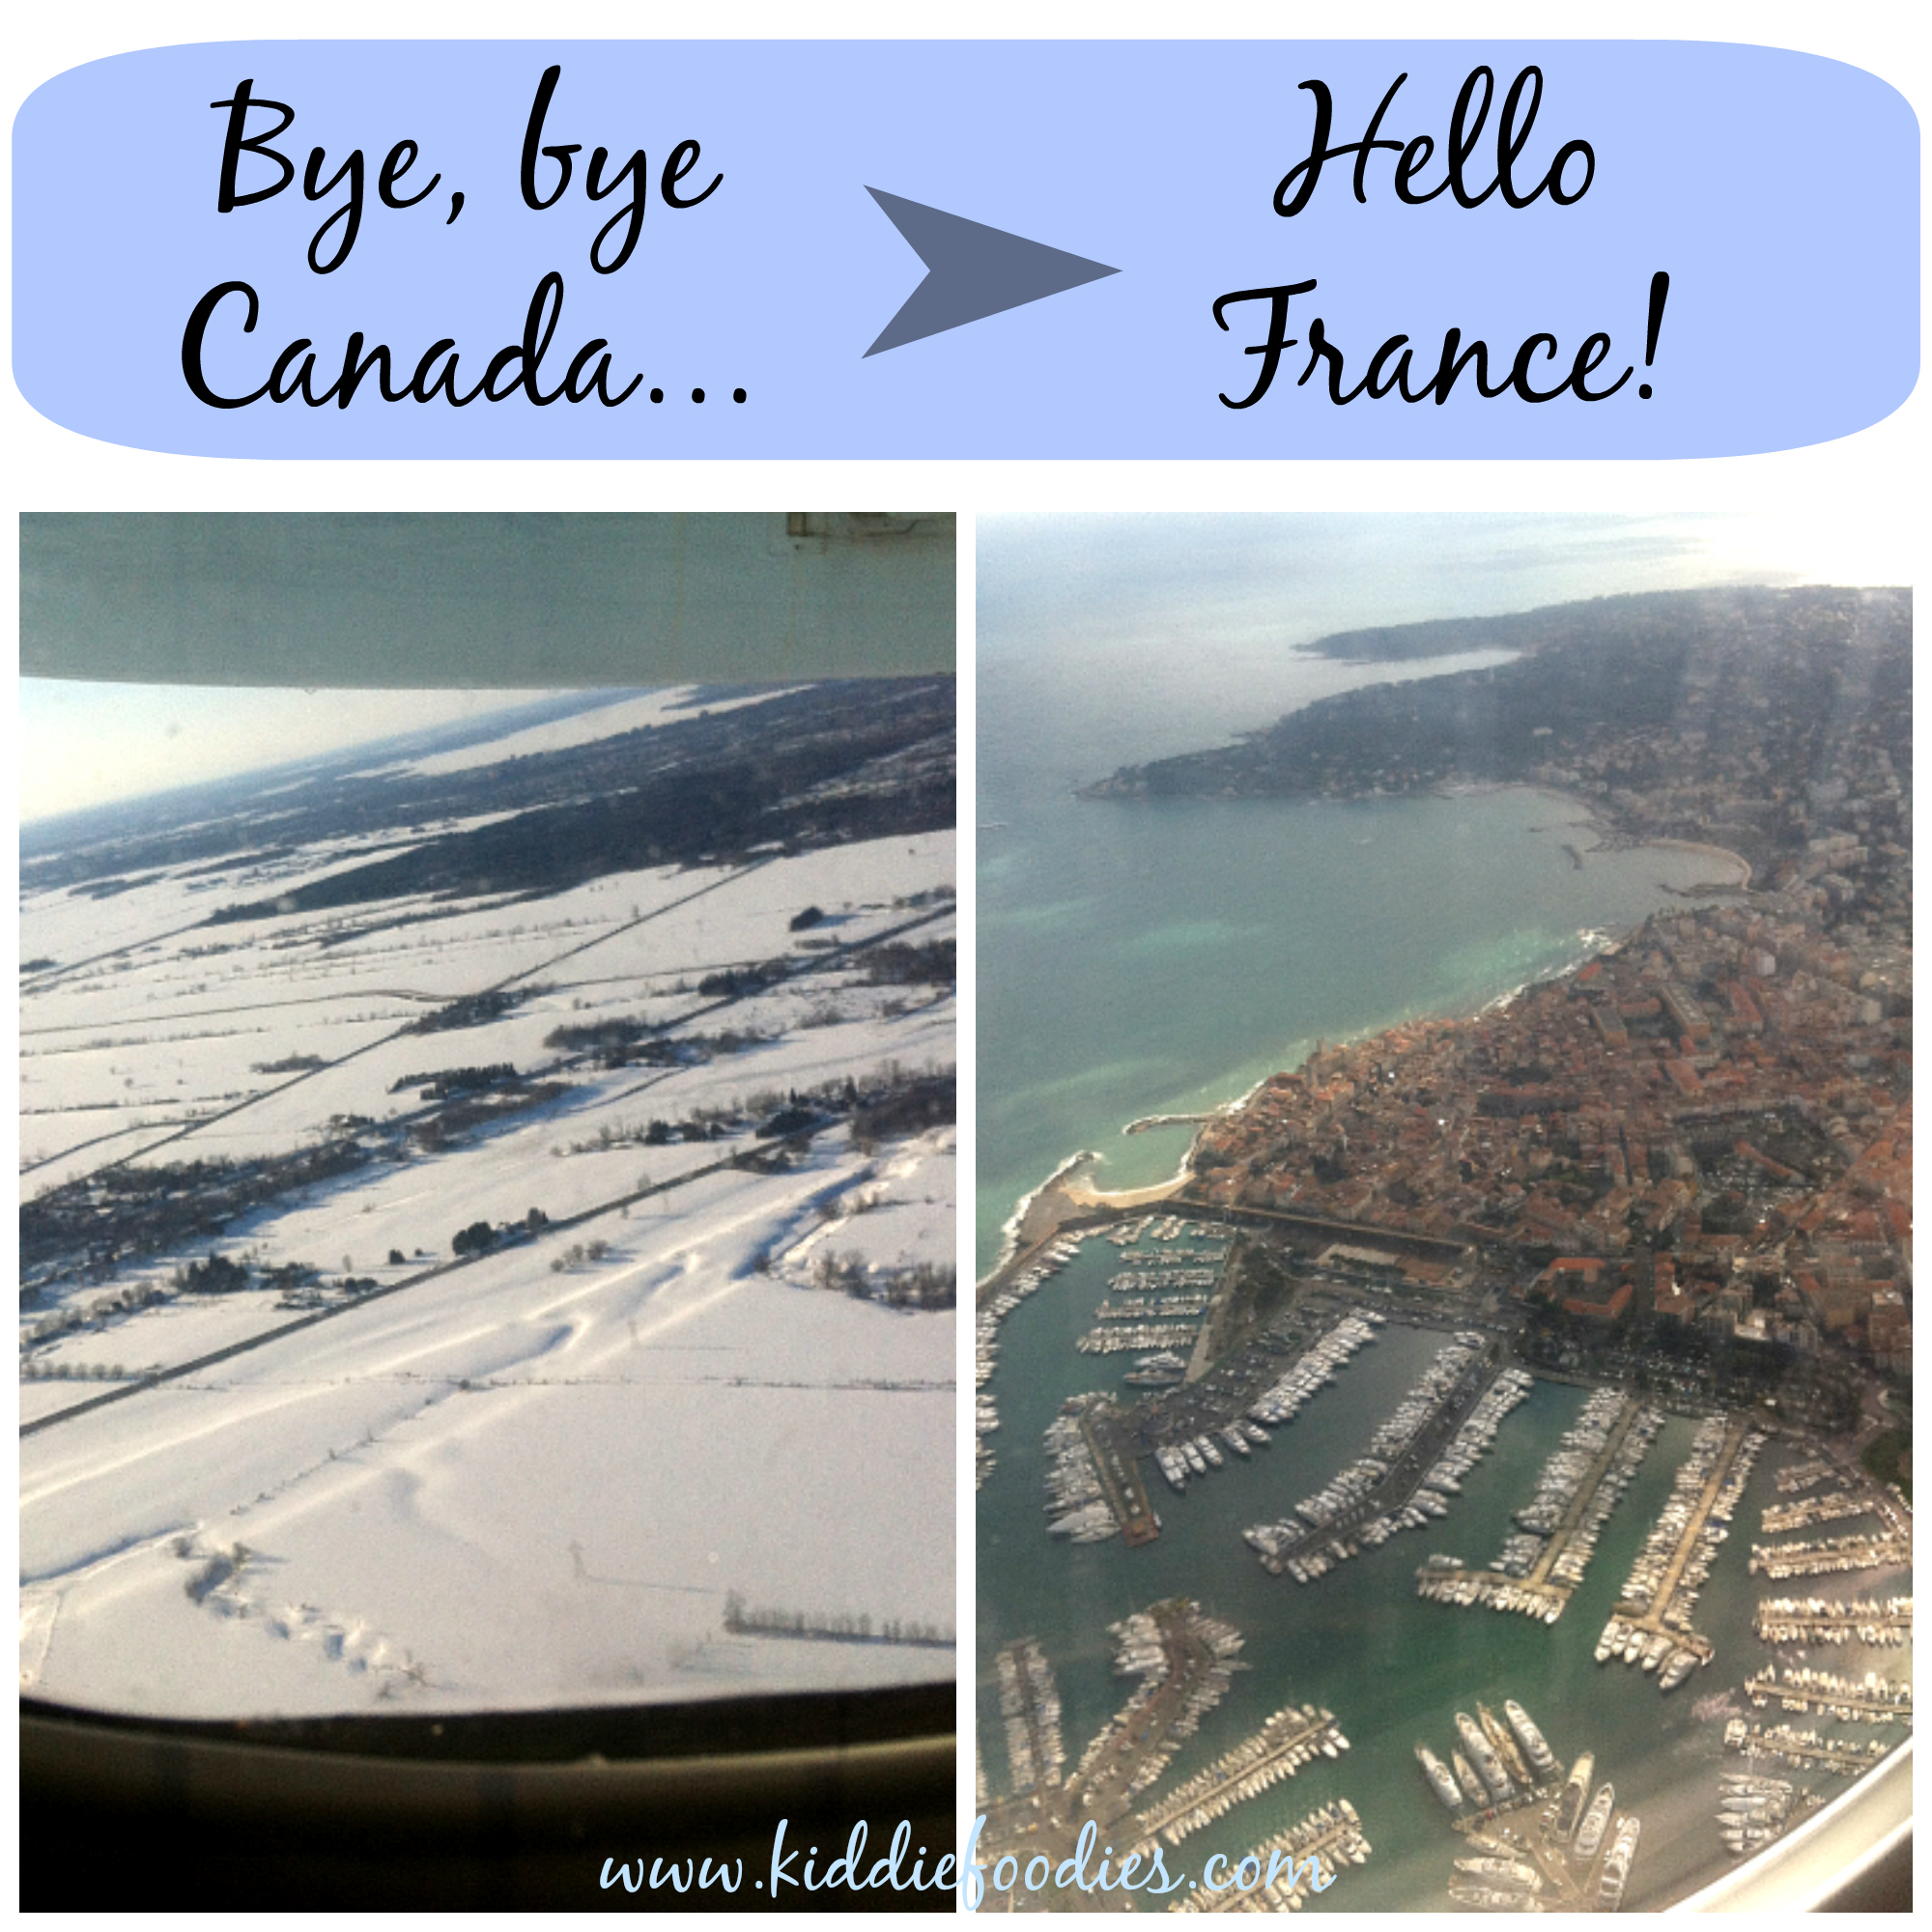 From Canada to France